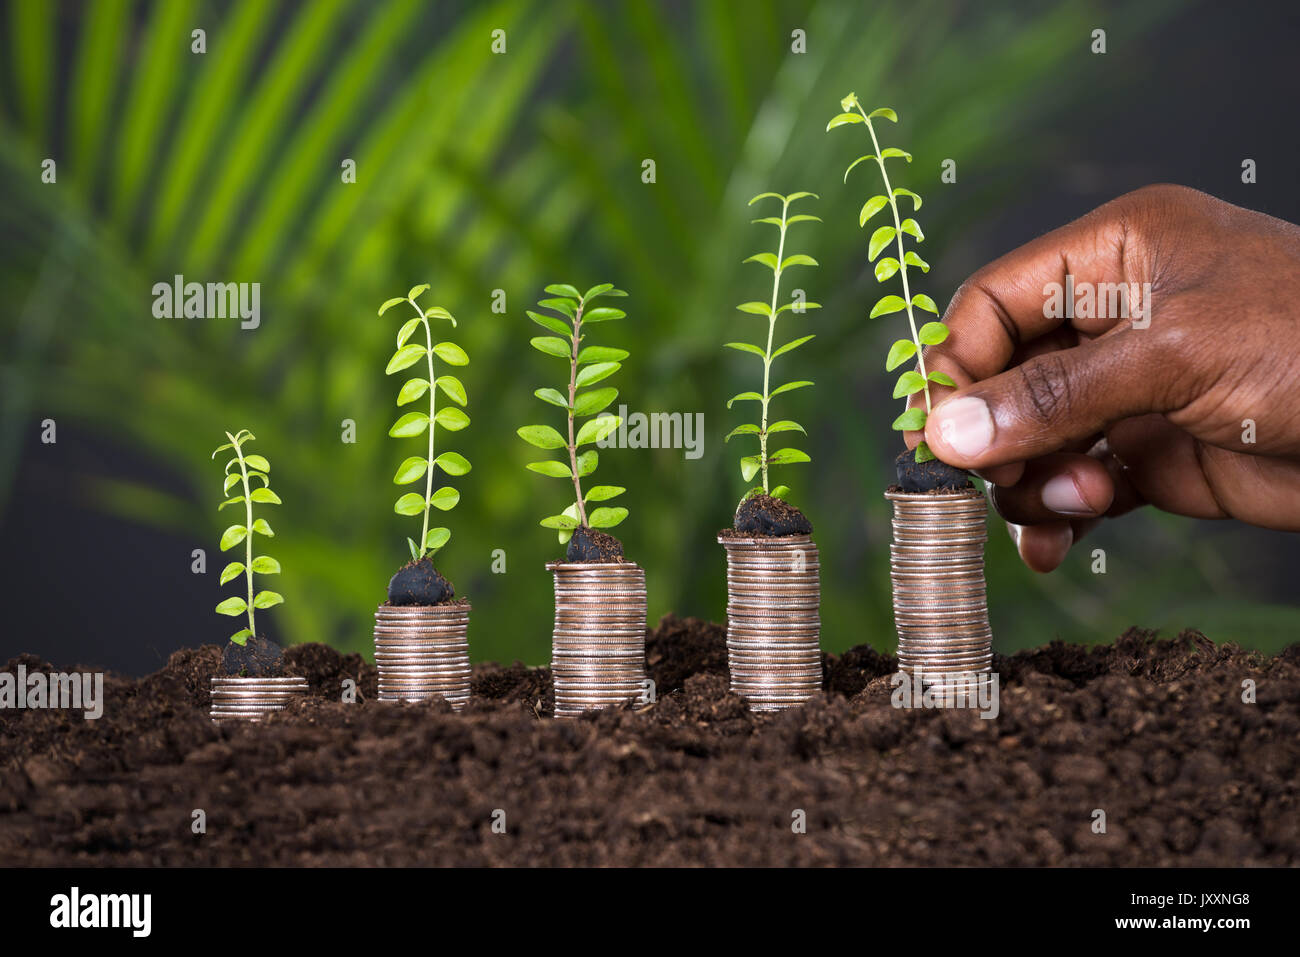 Person's Hand Holding Small Plant On Stacked Coins Stock Photo